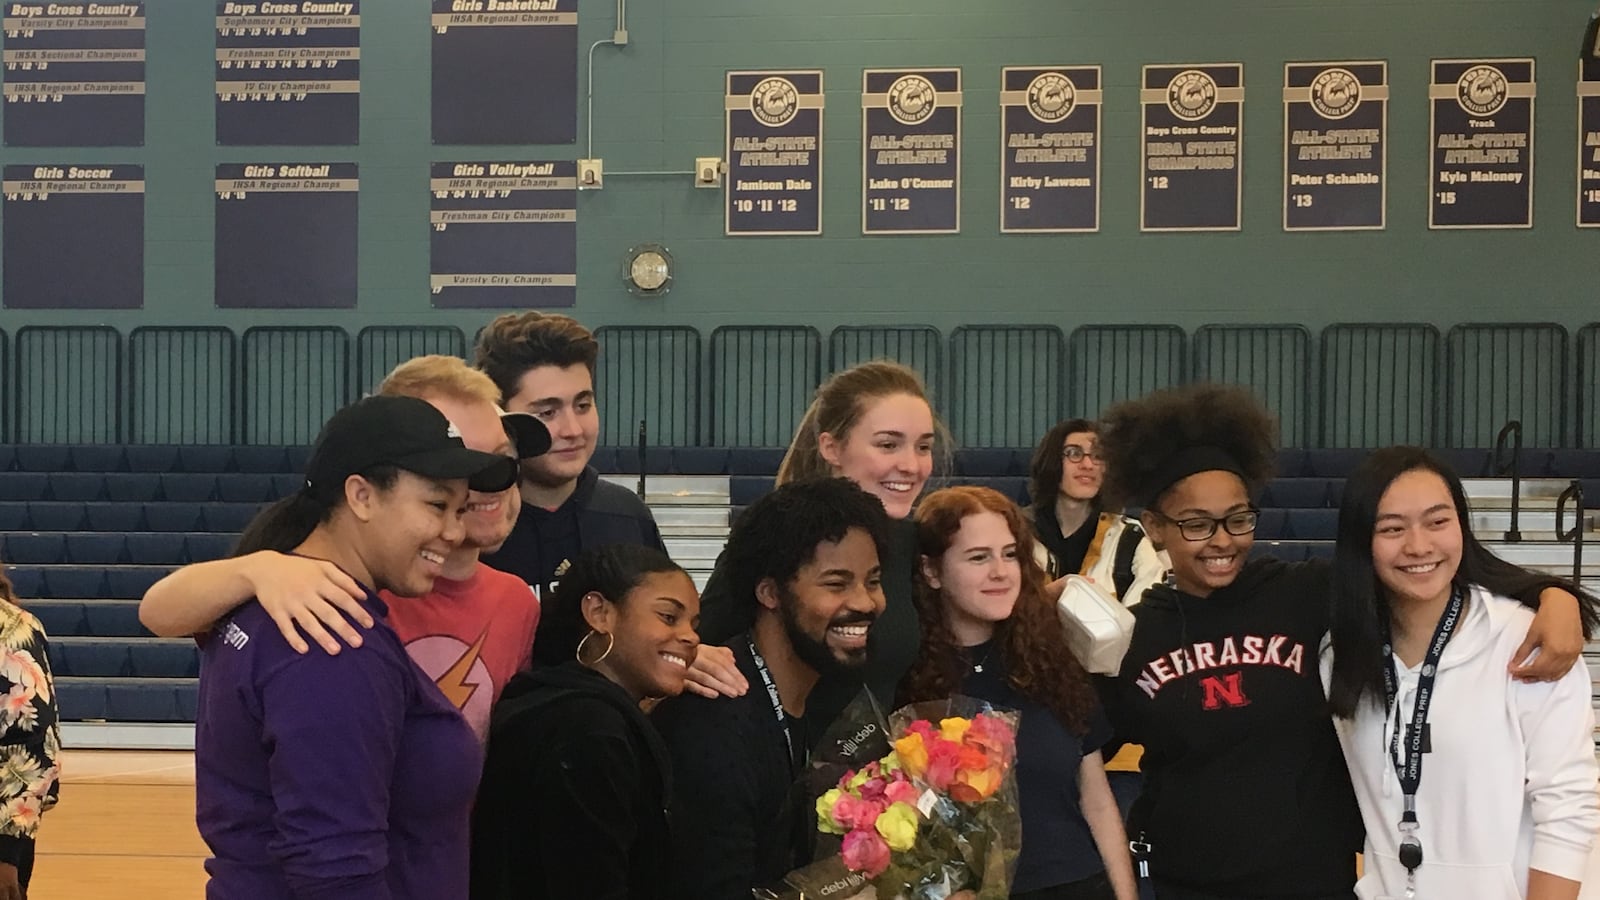 Brian Coleman, pictured center with flowers, poses with students from Jones College Prep on the day of his announcement